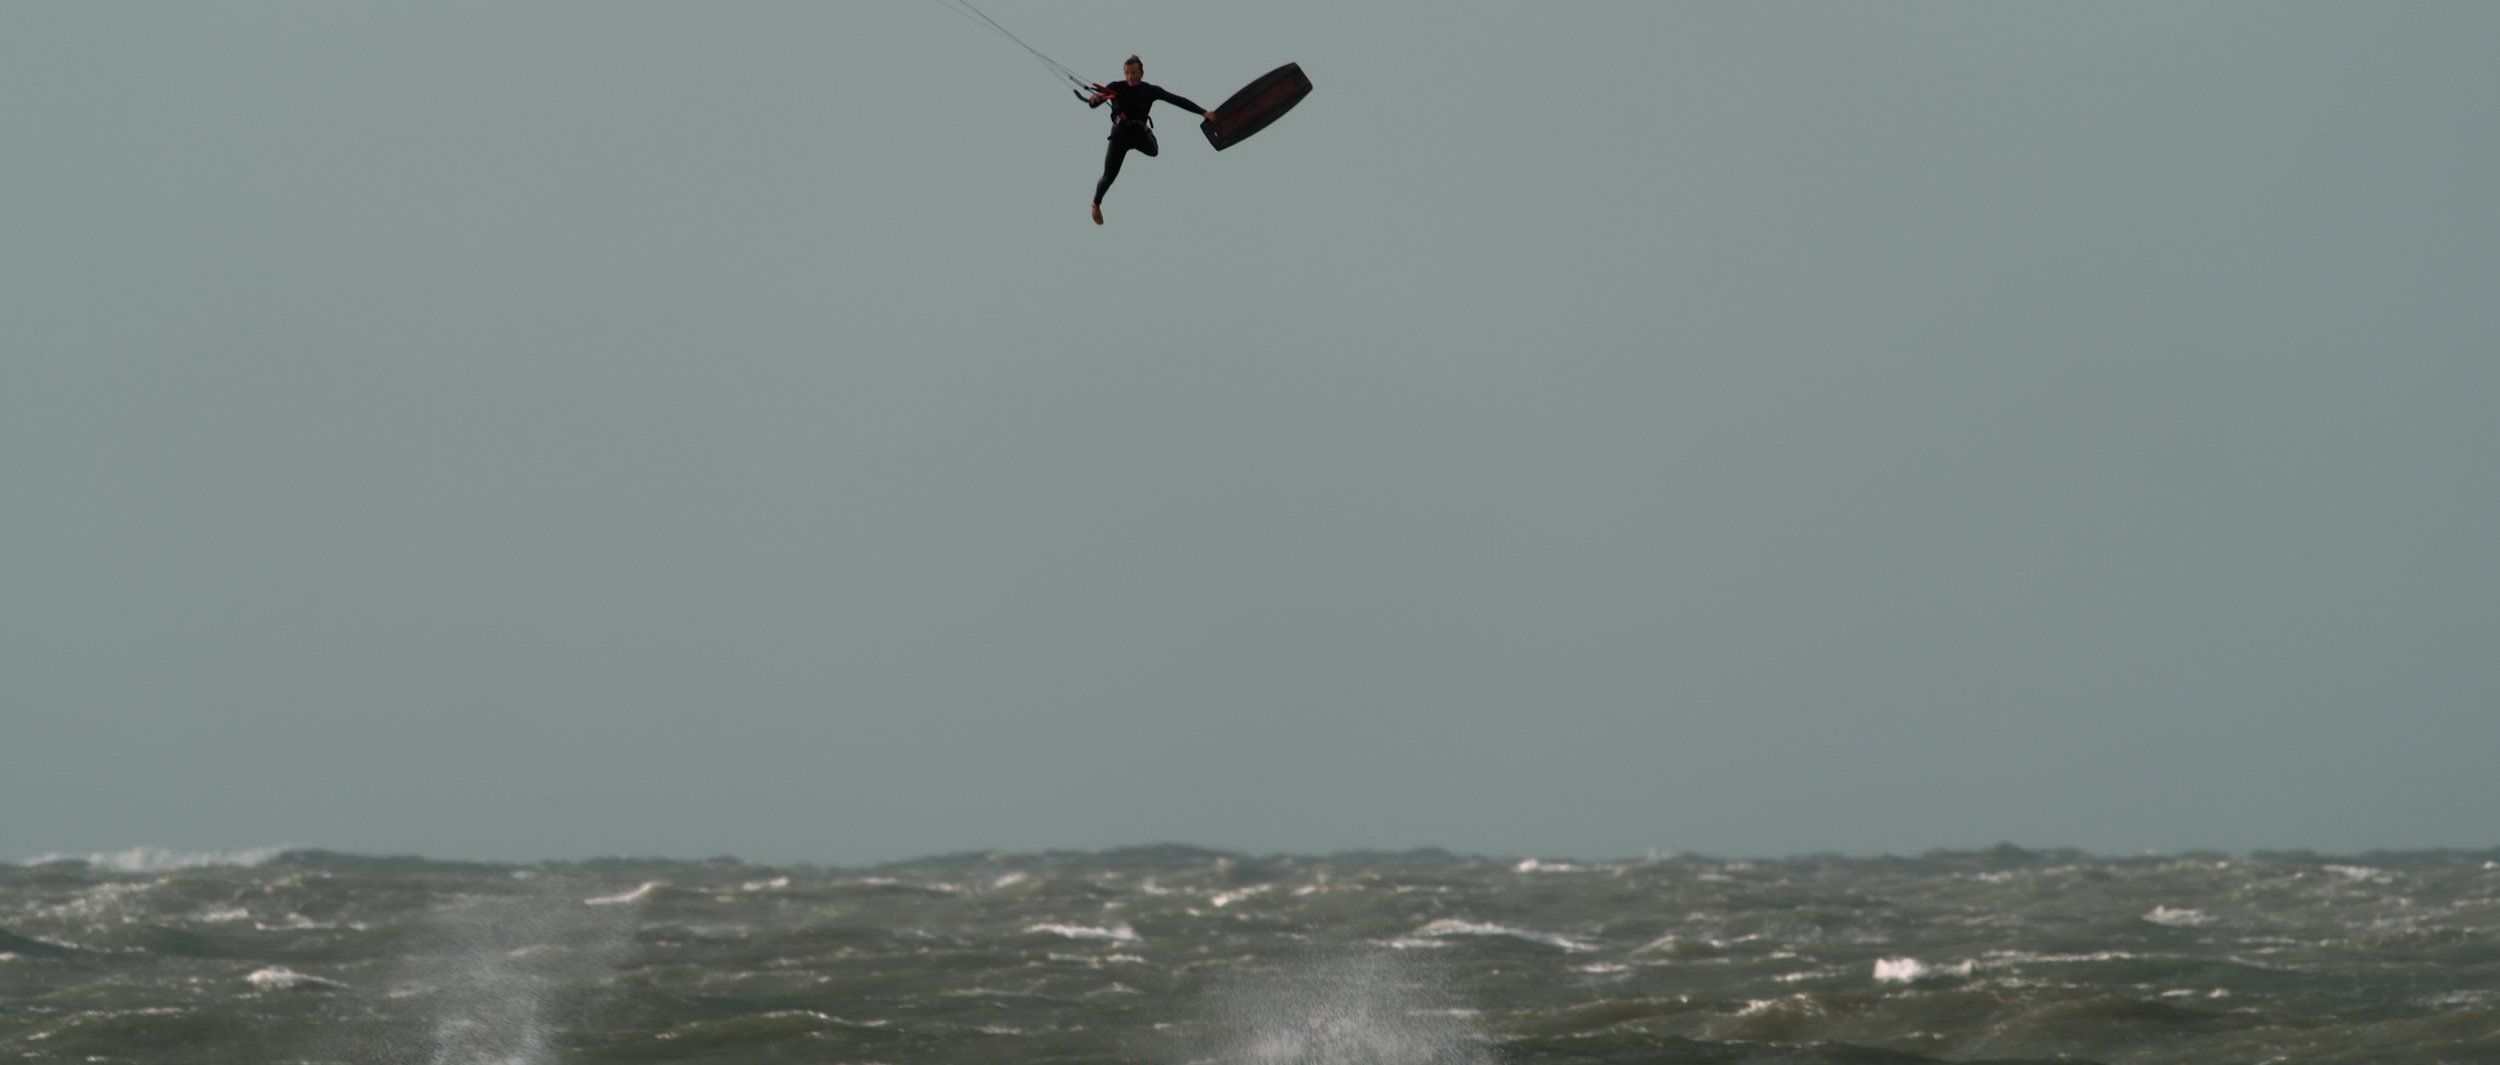 The Good, the Bad and the Ugly - Kiteboarding in Holland.00_14_19_17.Still058.jpg